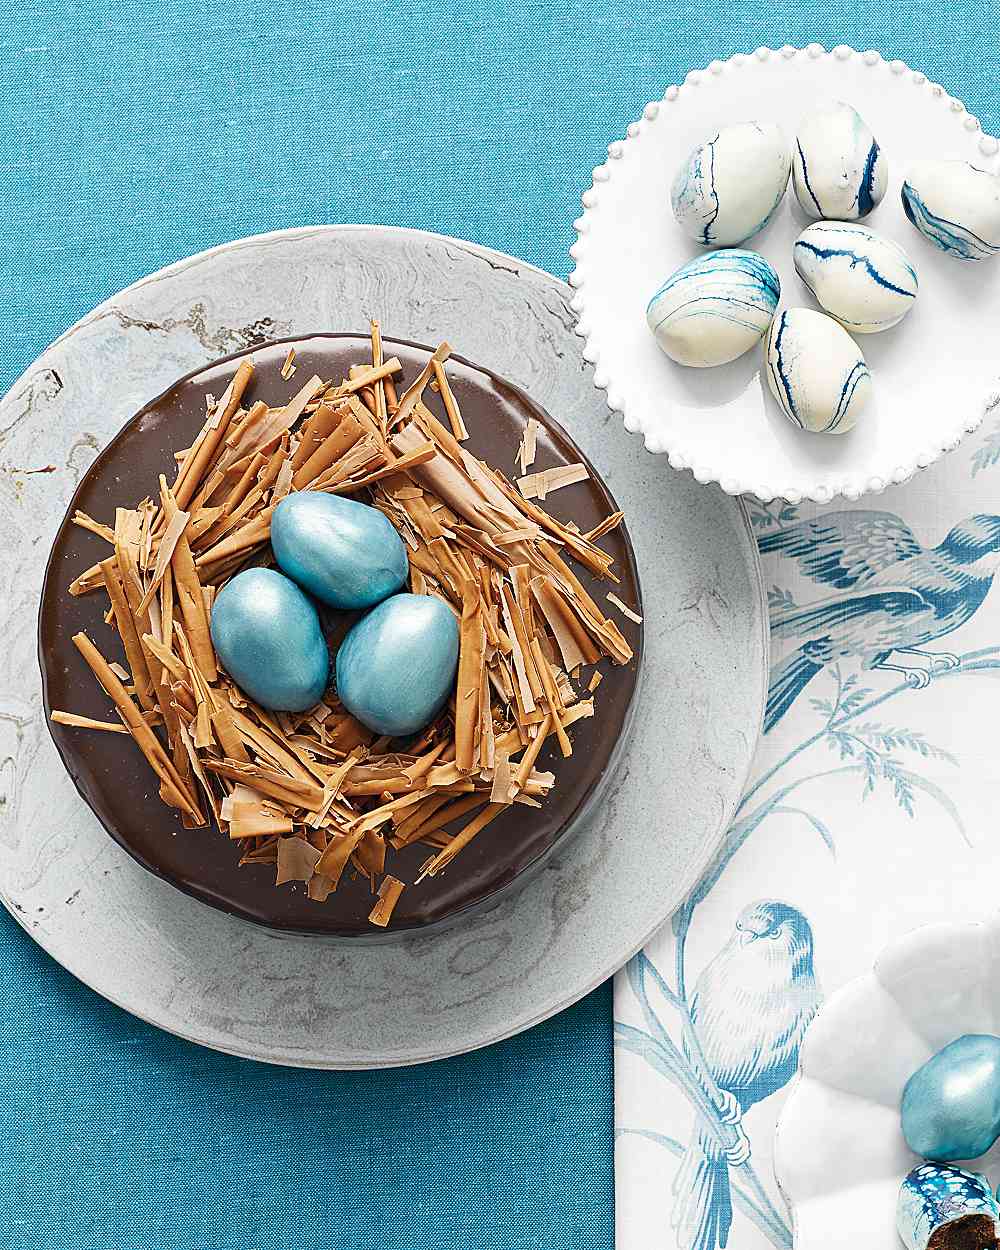 Rich Chocolate Cake with Ganache Frosting and Truffle-Egg Nest